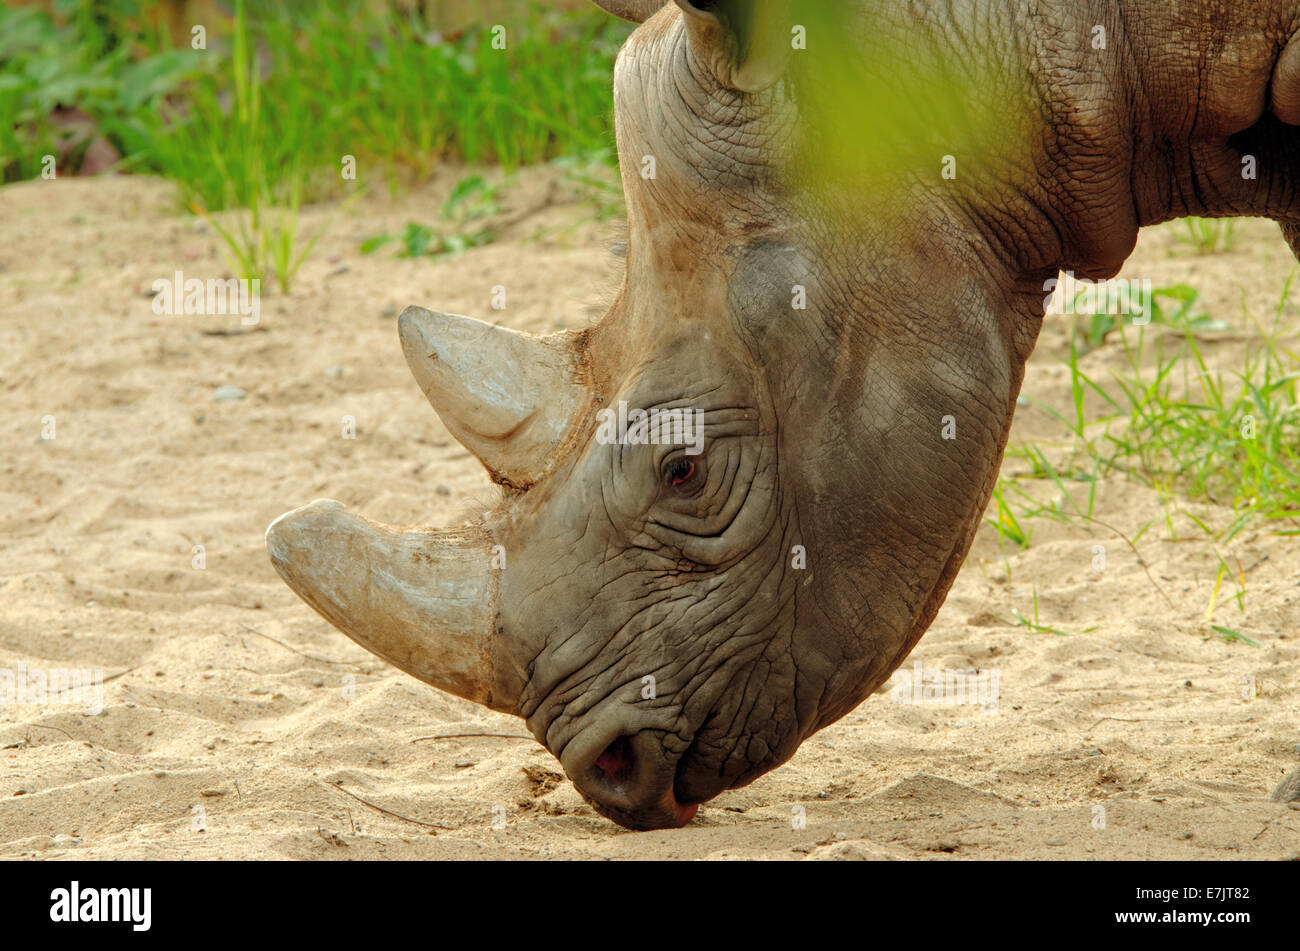 Black rhinoceros or hook-lipped rhinoceros (Diceros bicornis) is a species of rhinoceros, native to eastern and central Africa. Stock Photo